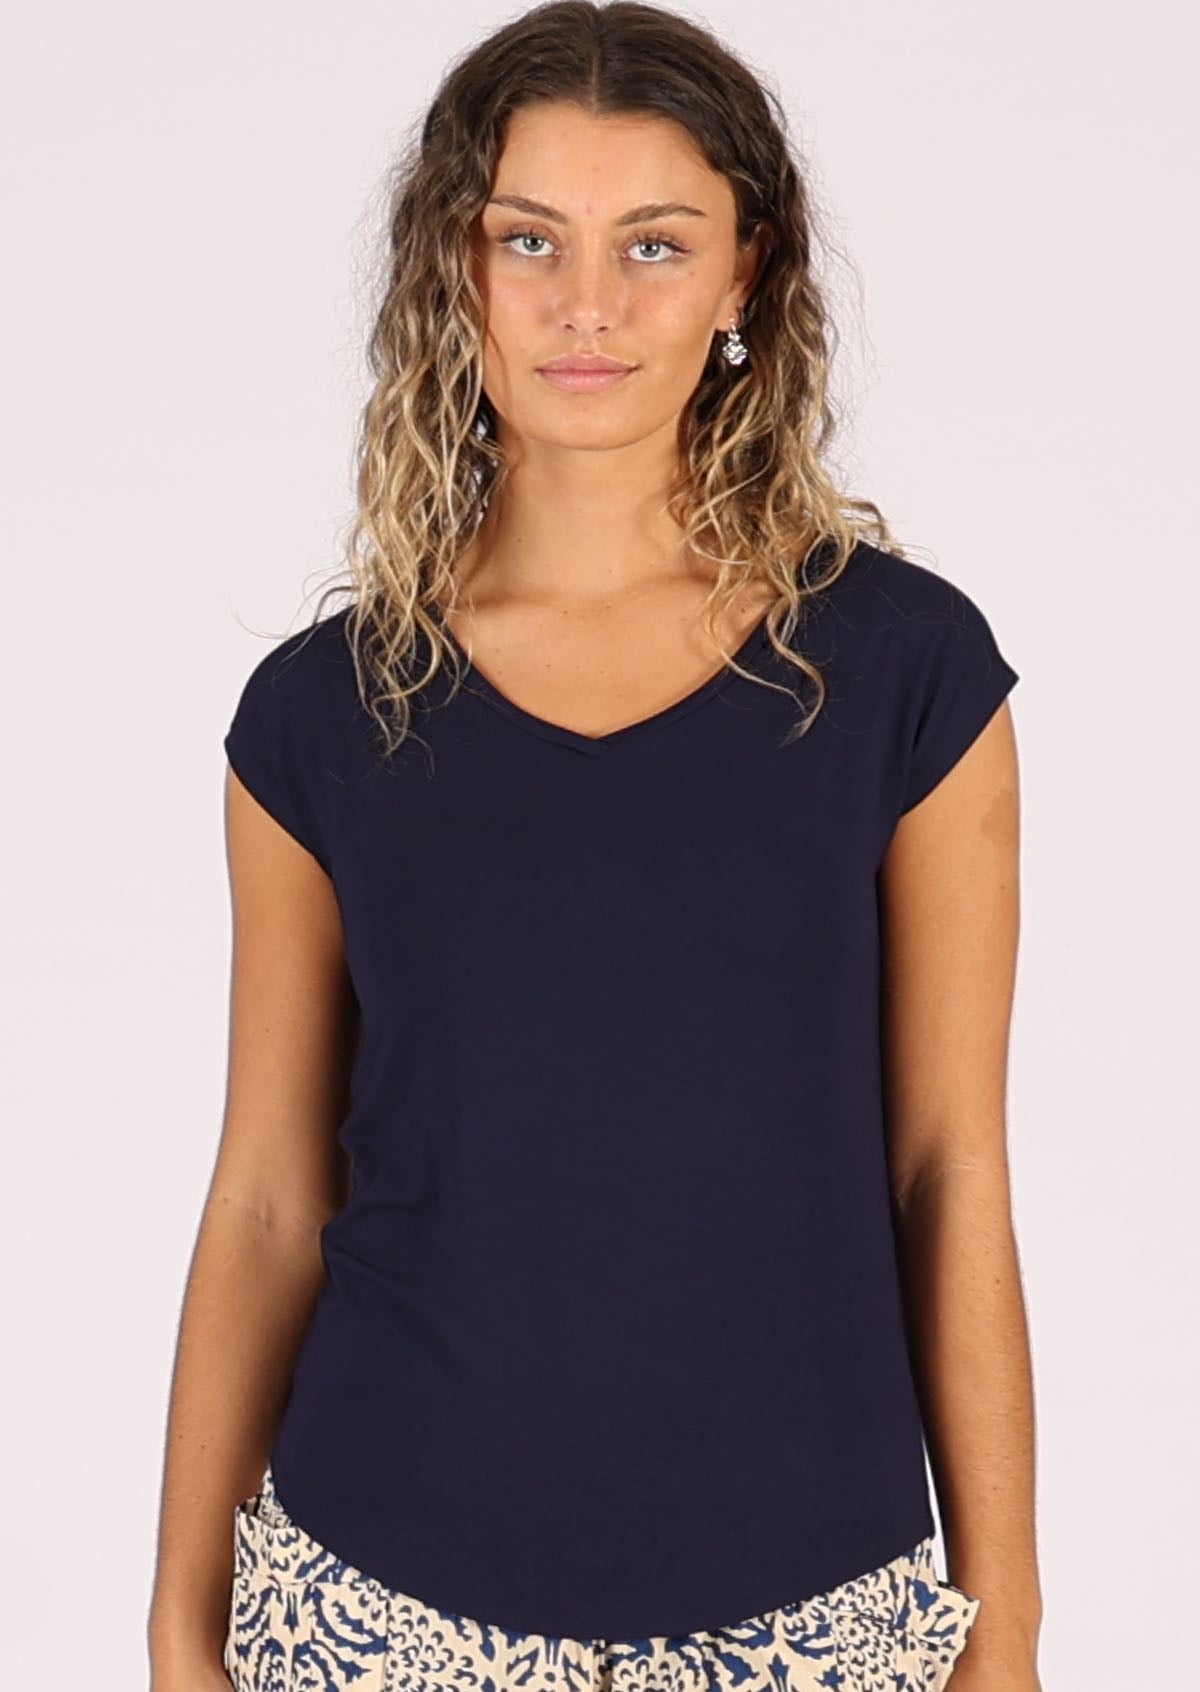 woman wearing navy blue v neck tee